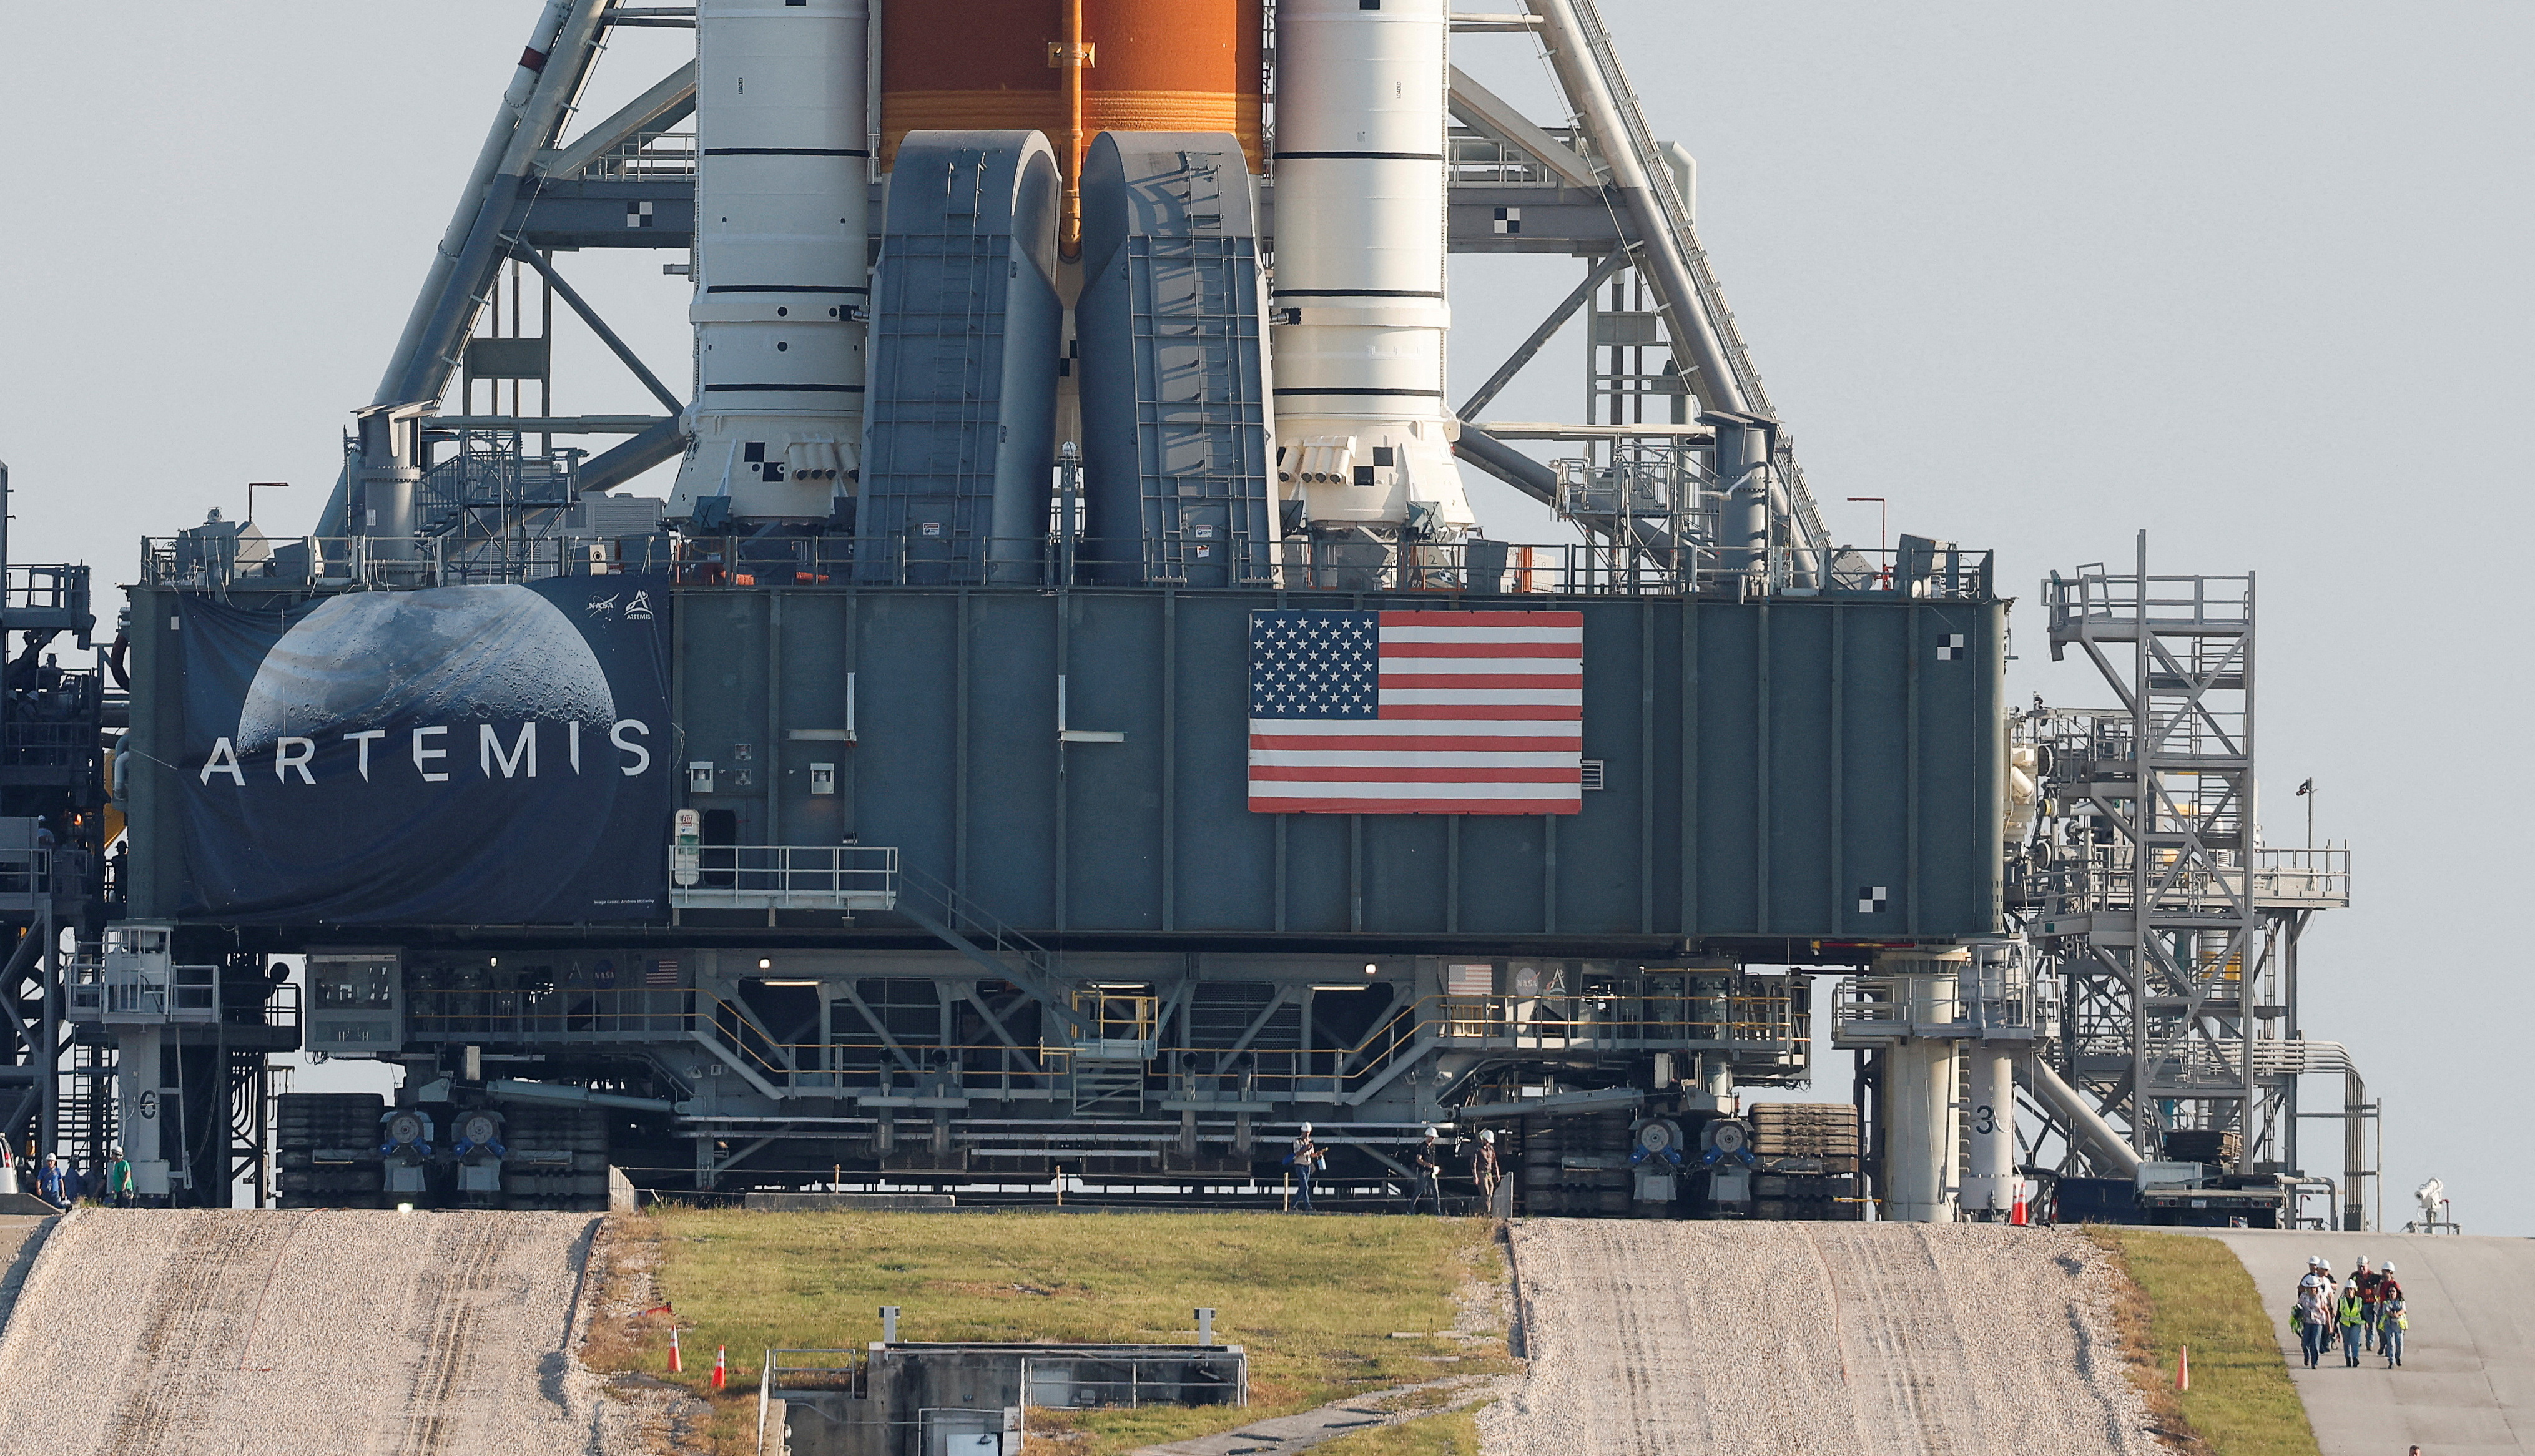 NASA's next-generation moon rocket, the SSLS Artemis 1 rocket with its Orion crew capsule perched on top, leaves the Vehicle Assembly Building